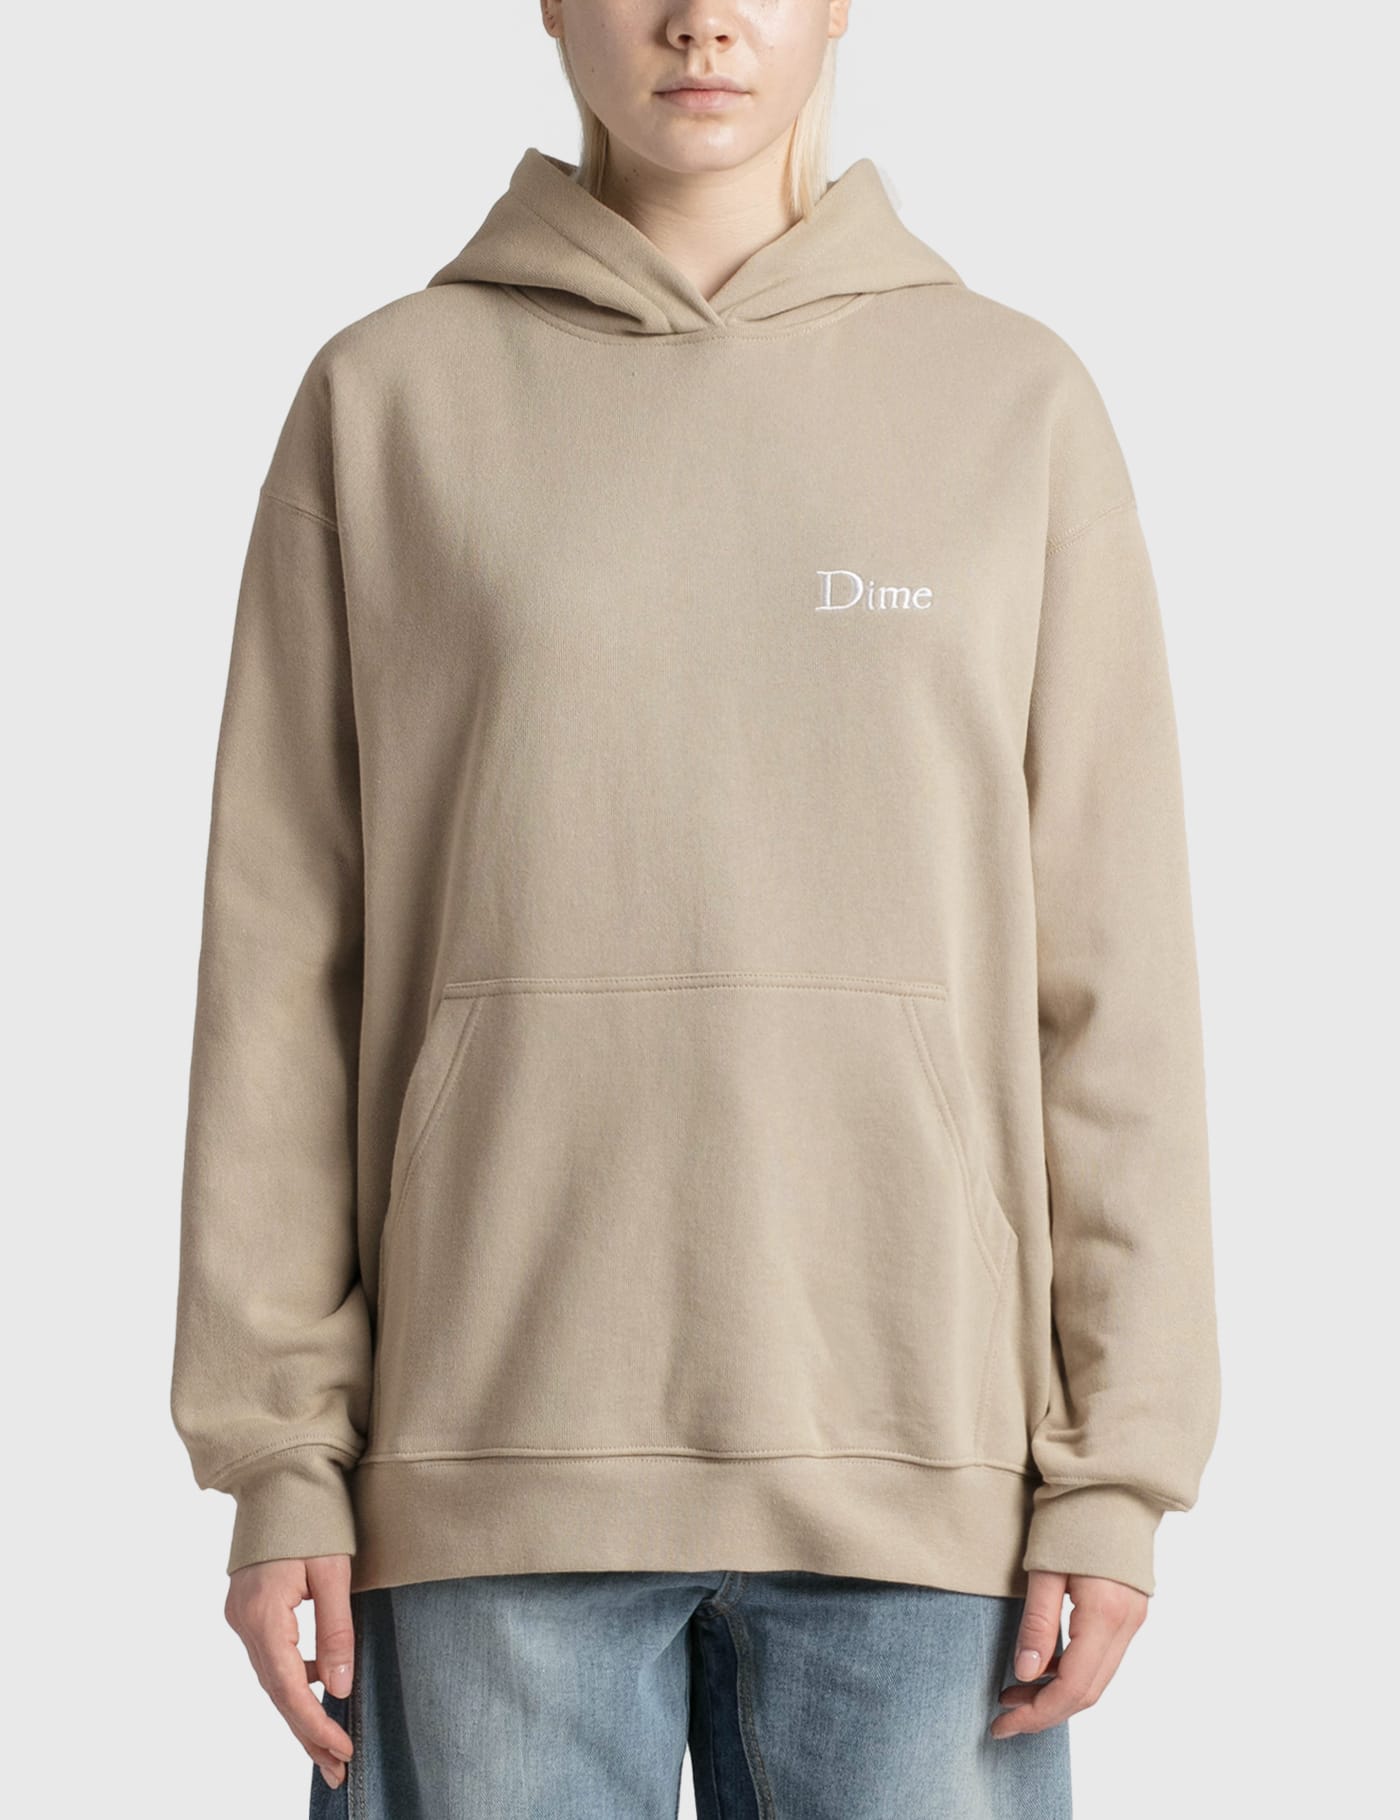 Dime - Classic Small Logo Hoodie | HBX - Globally Curated